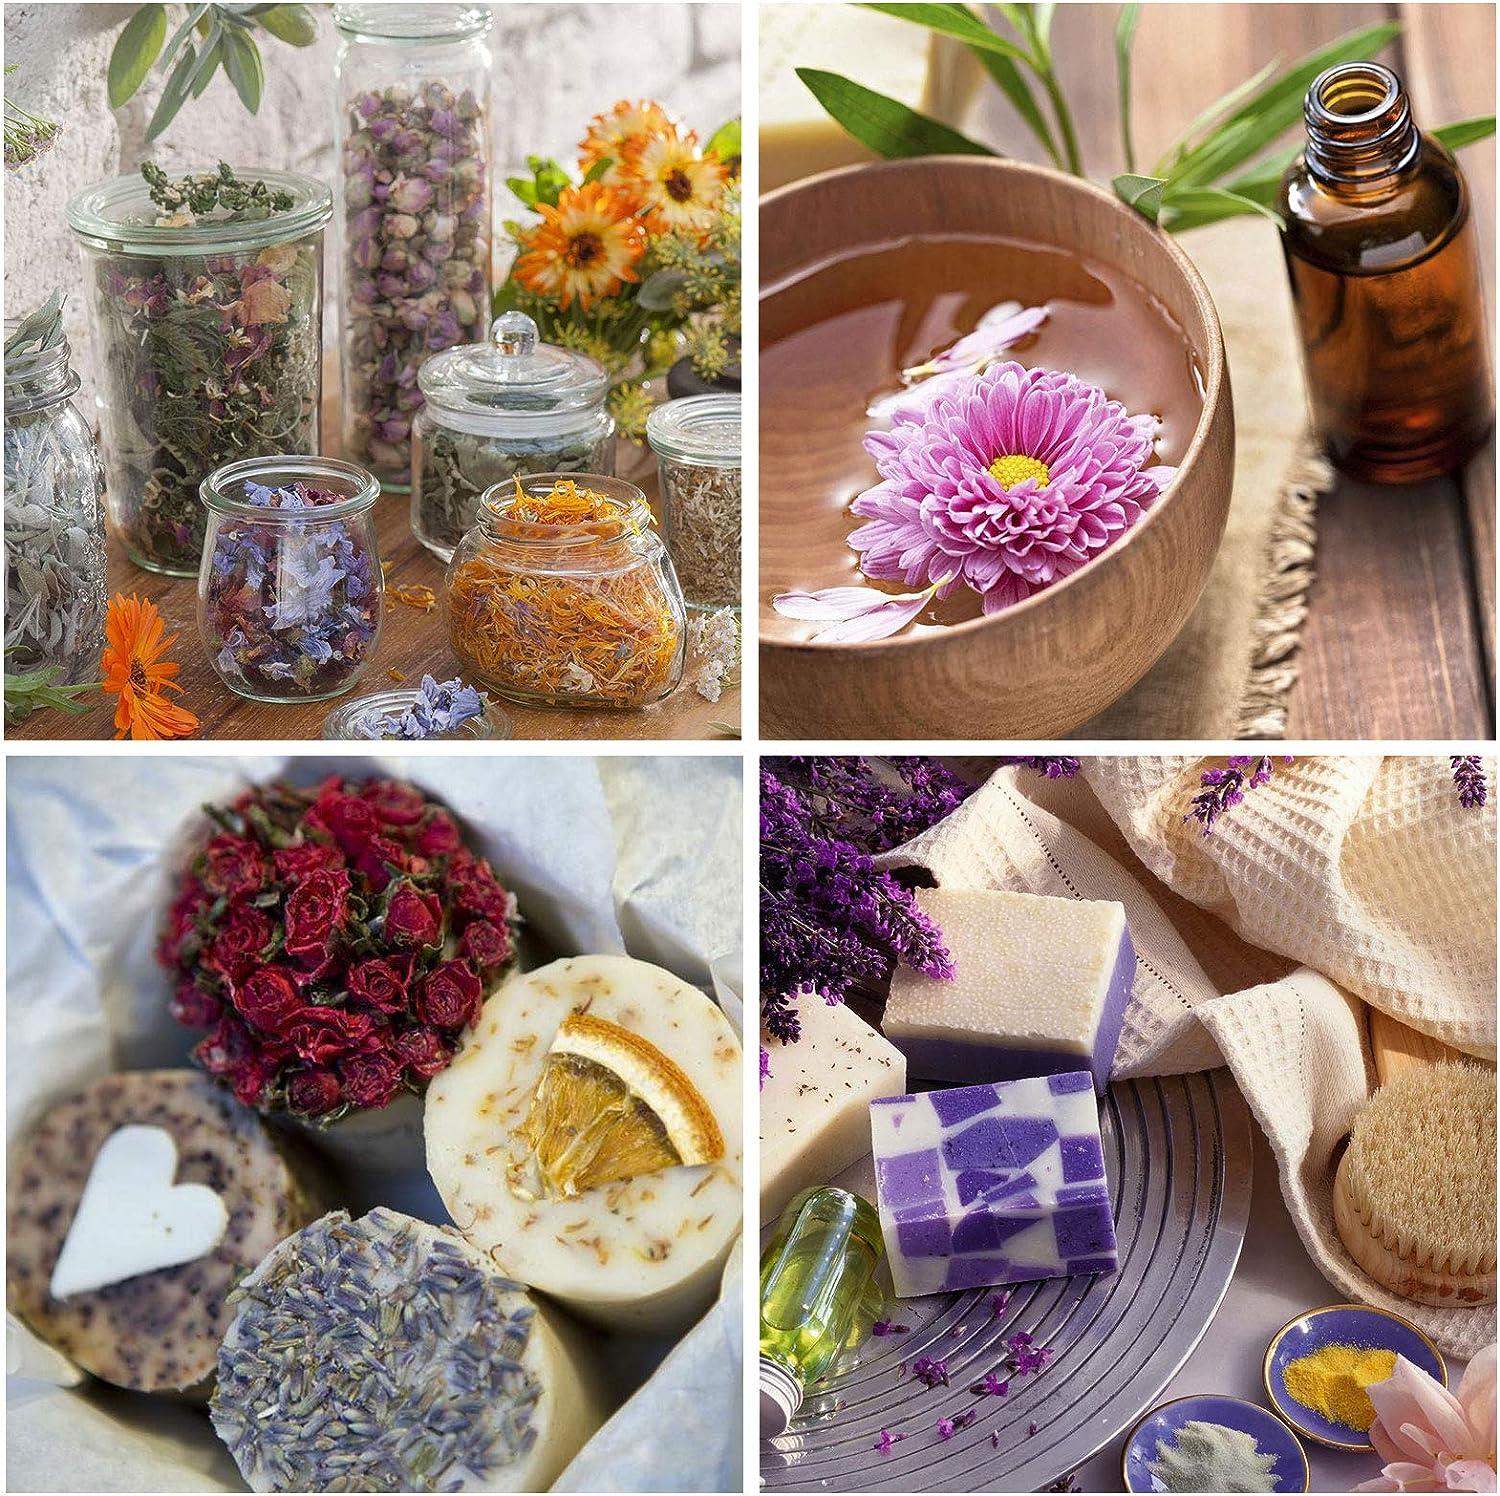 9 Bags Dried Flowers,100% Natural Dried Flowers Herbs Kit for Soap Making, DIY Candle Making,Bath - Include Rose Petals,Lavender,Don't Forget Me